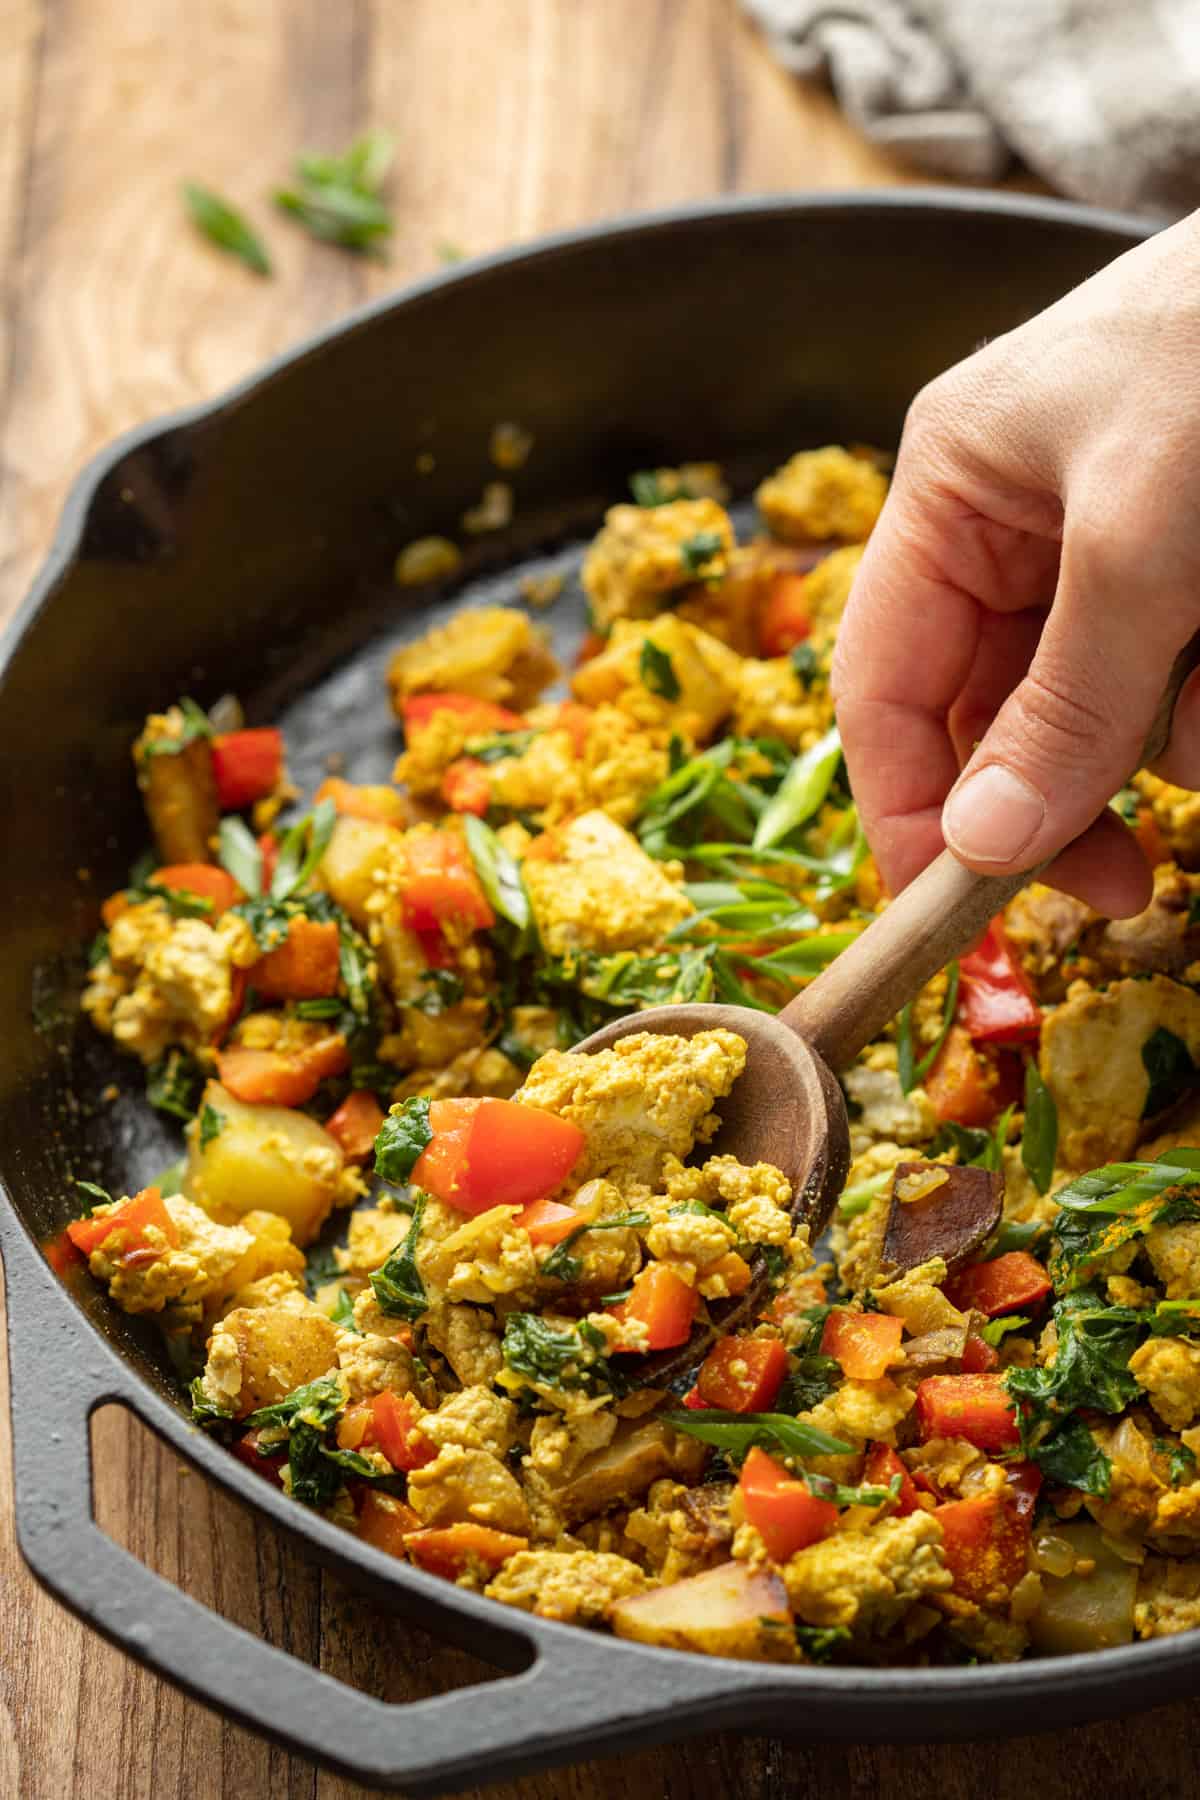 Hand scooping Tofu Scramble from a skillet with a wooden spoon.